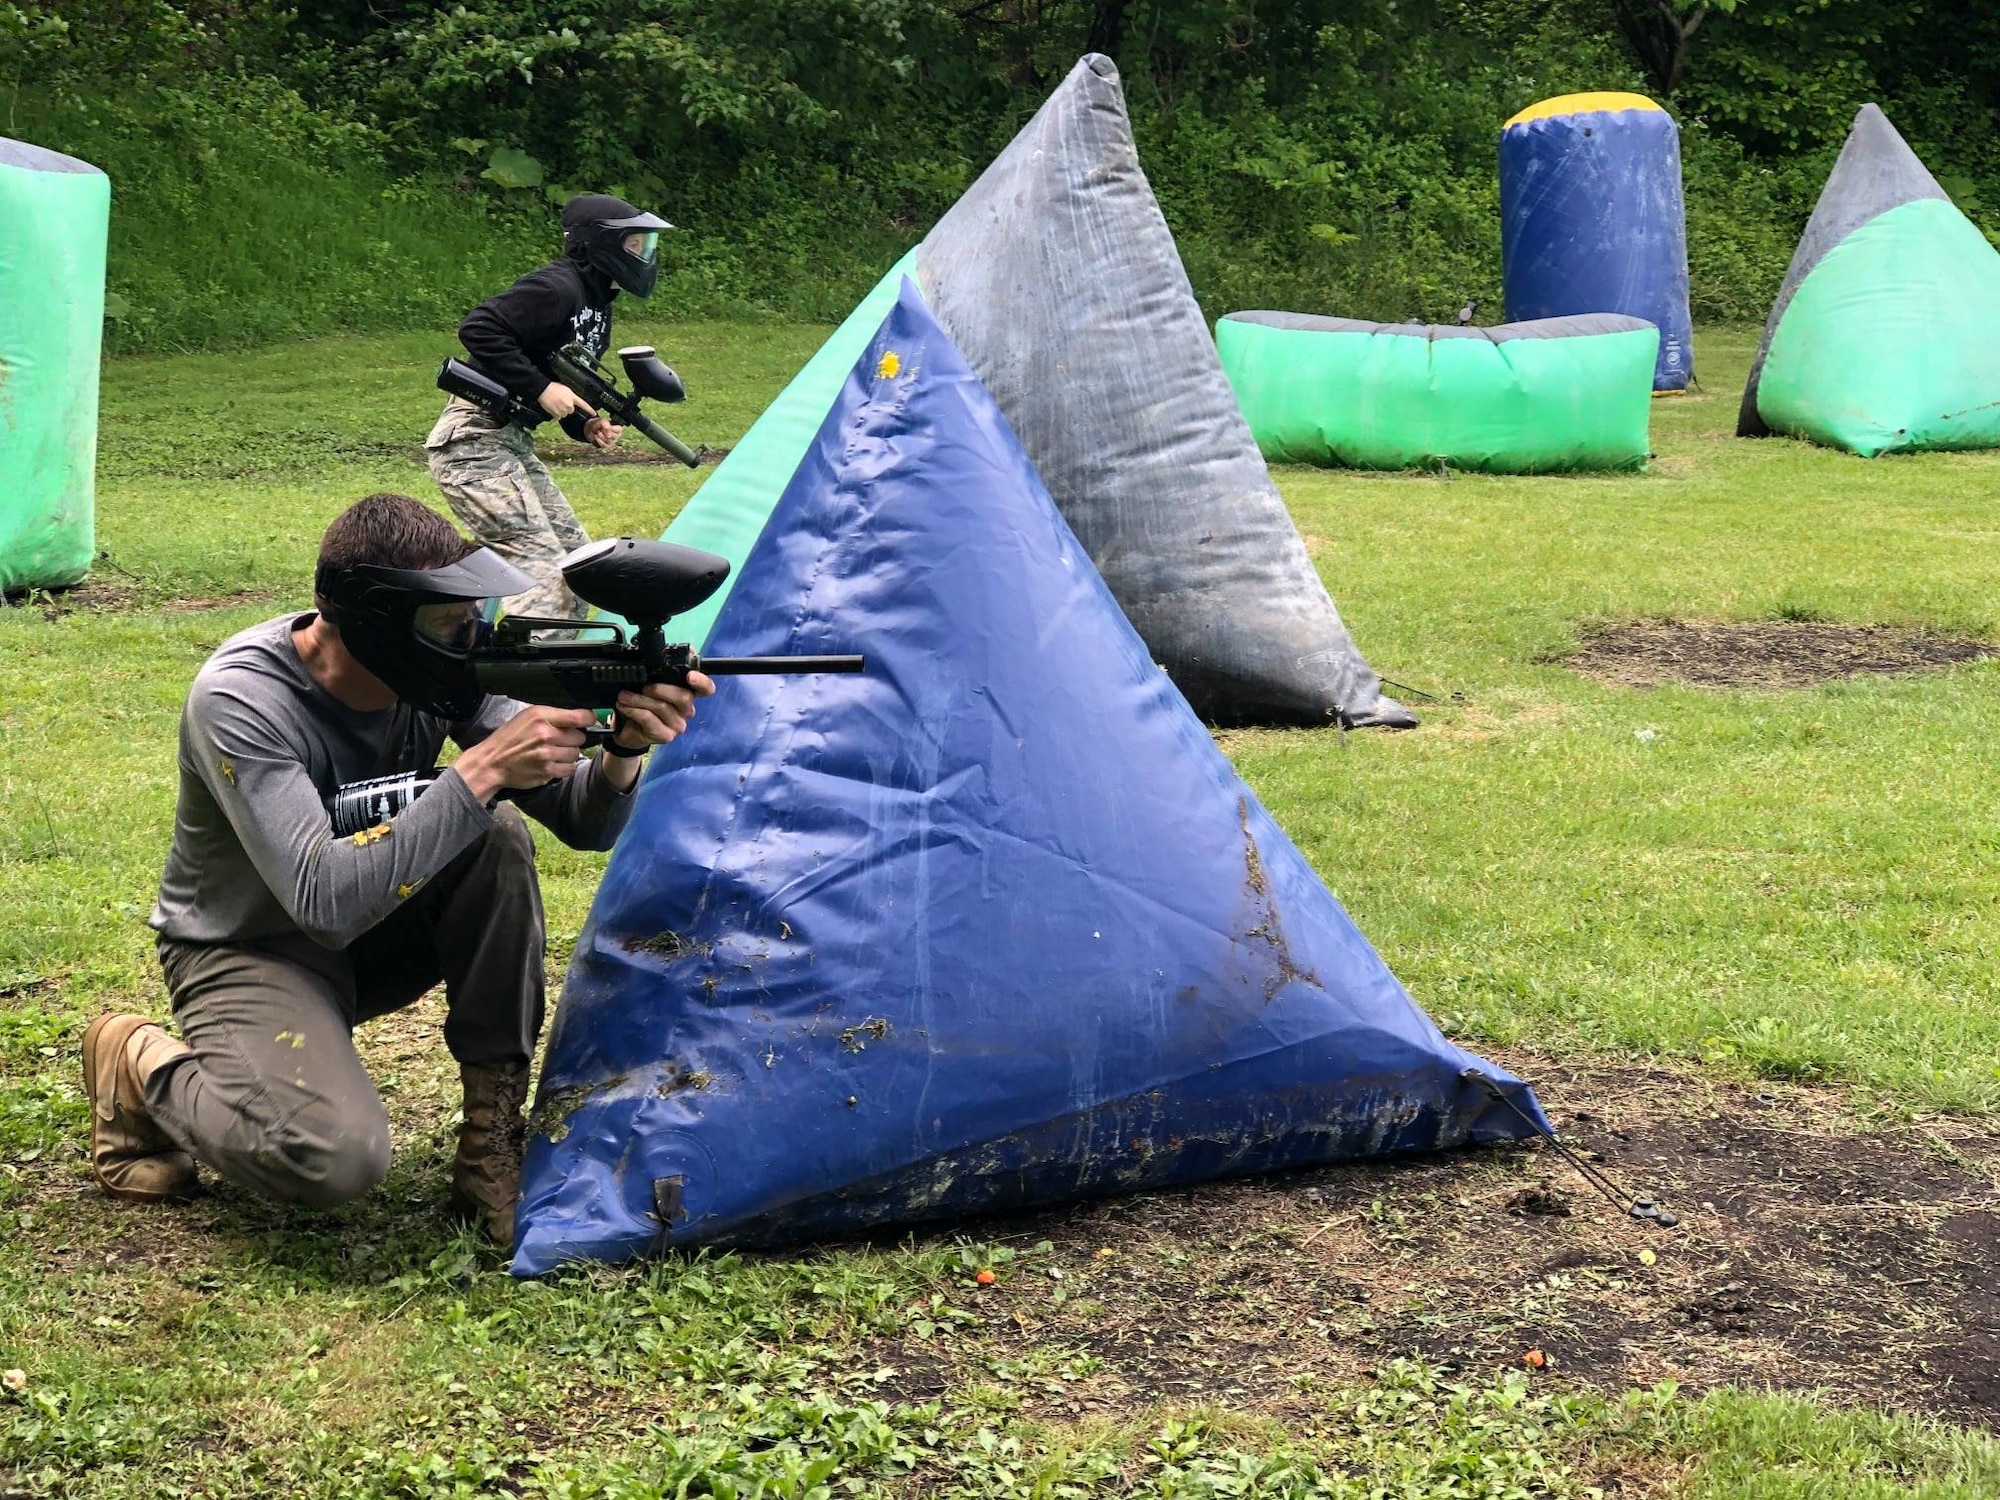 Members shoot a paintball gun while taking cover.